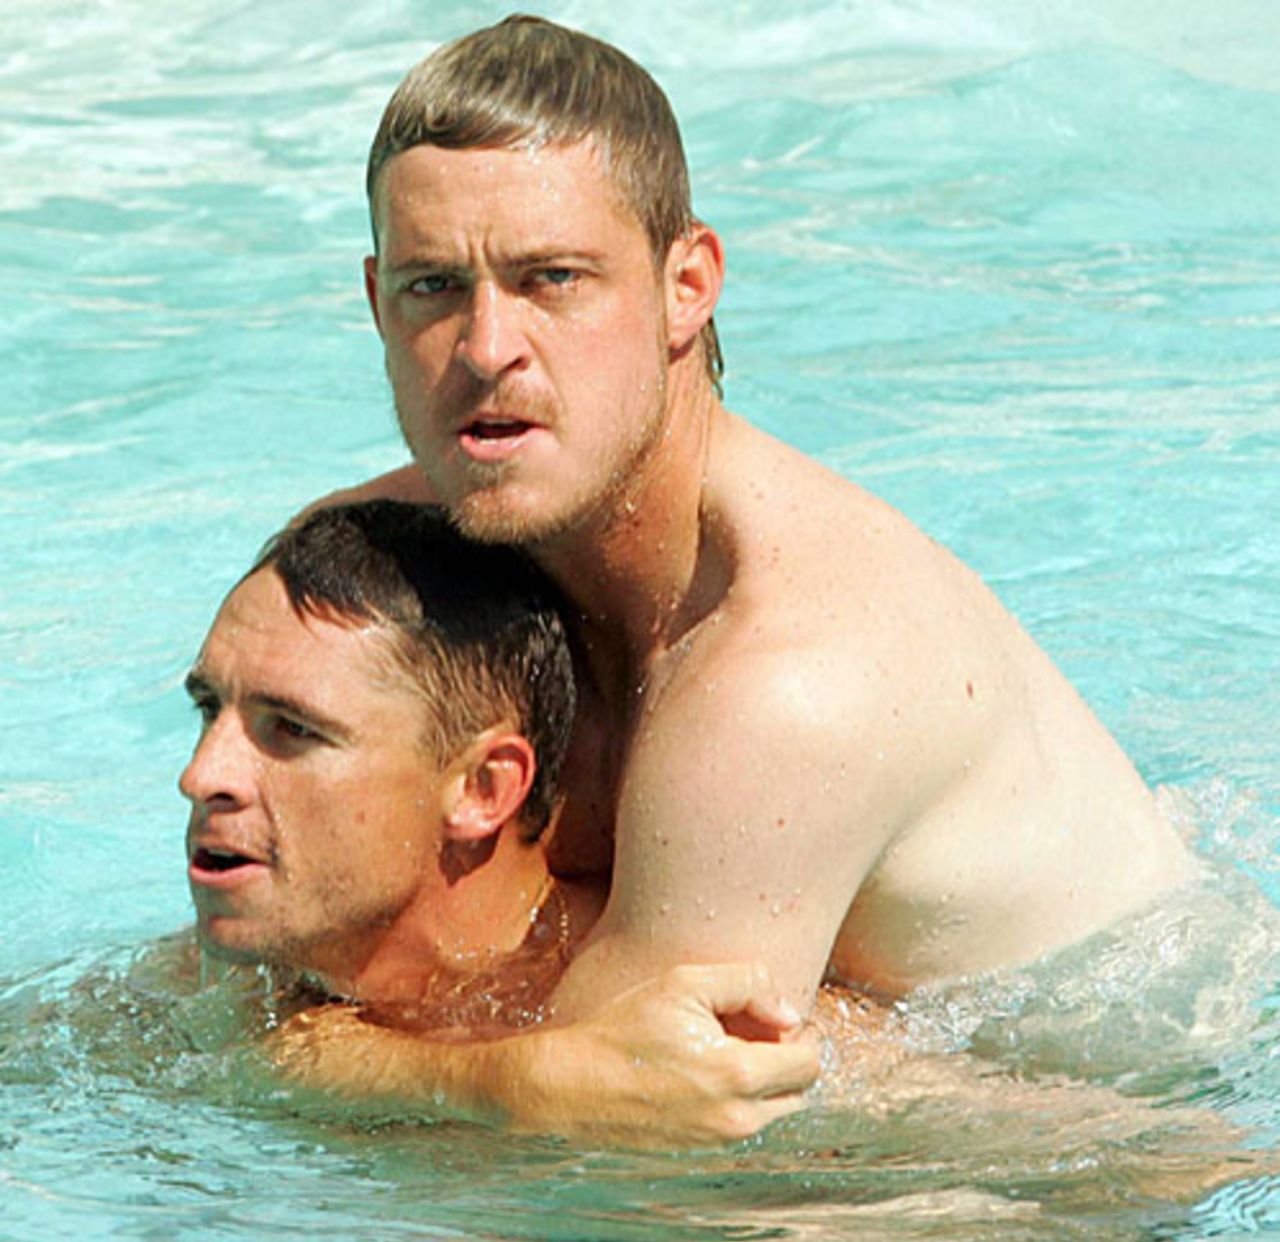 Paul Harris and Andre Nel in the pool, Lahore, October 14, 2007